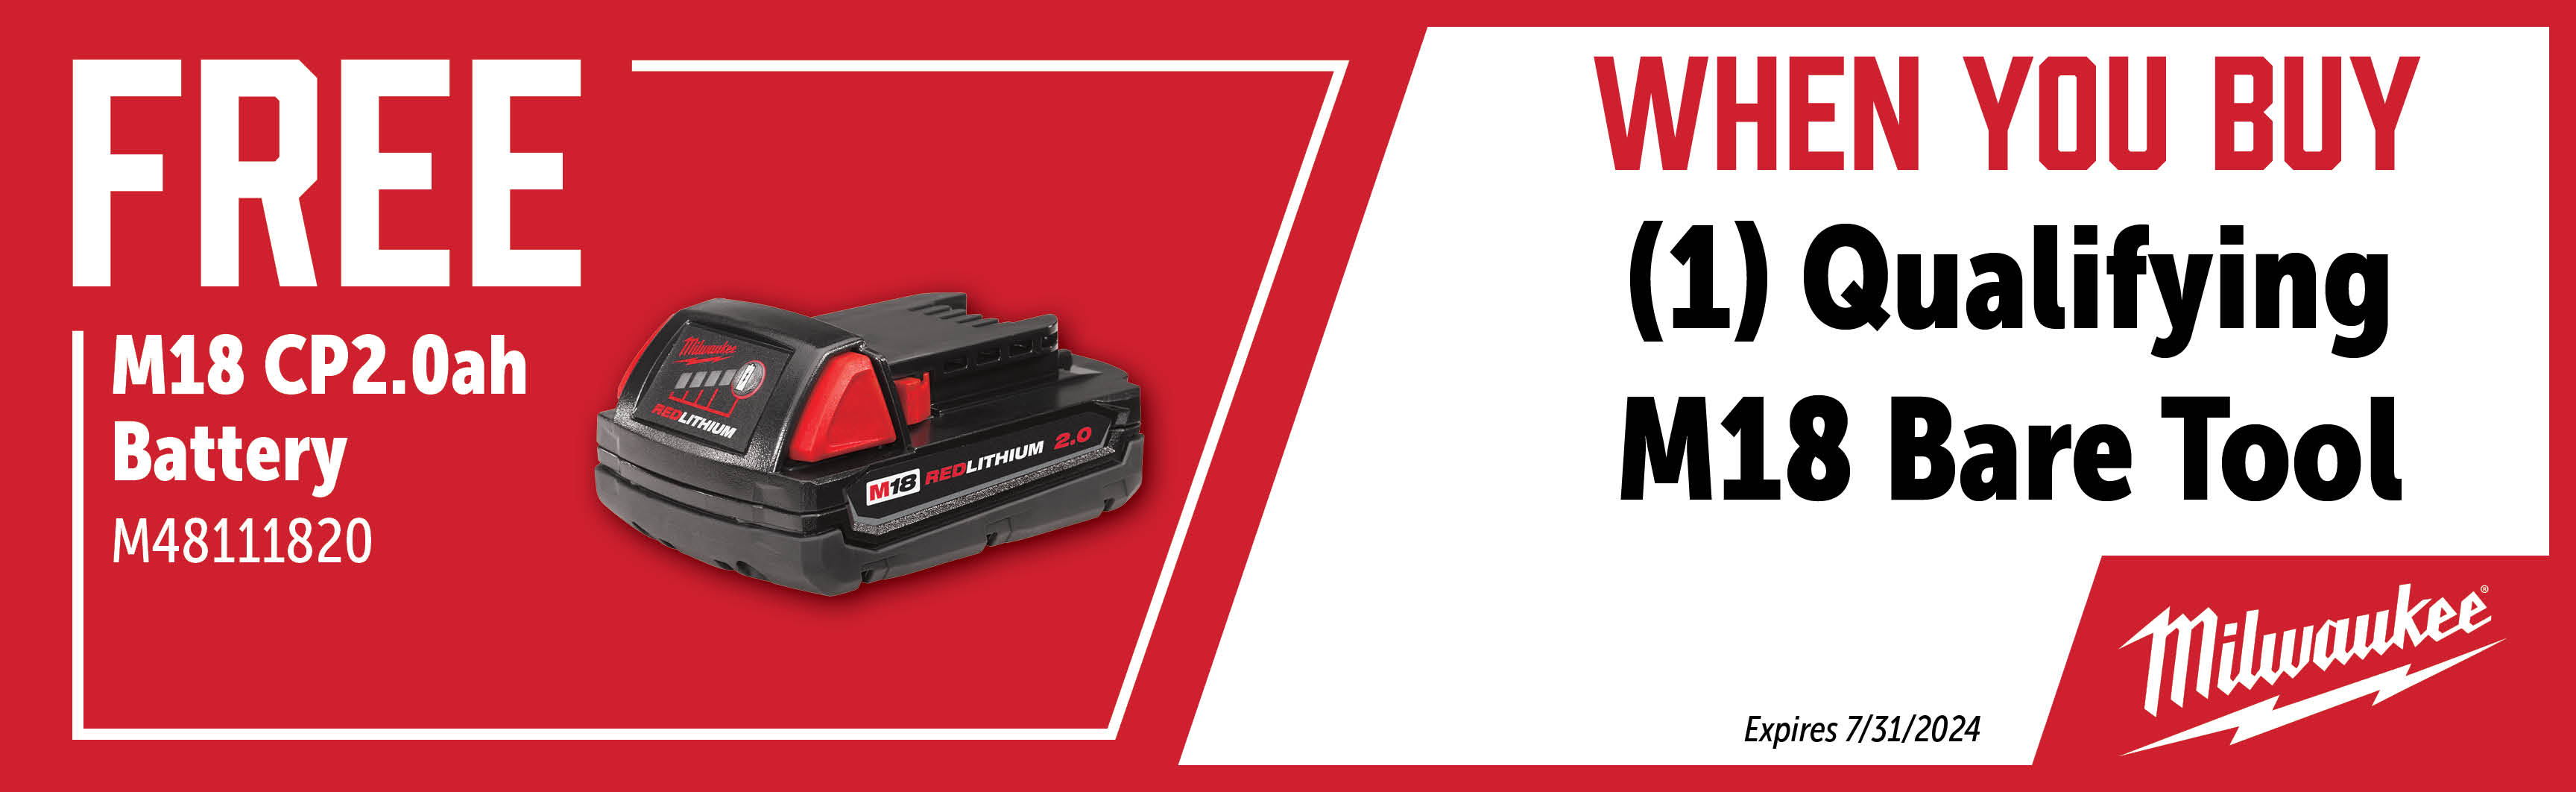 Milwaukee May - July: Buy a Qualifying M18 Bare Tool and Get a Free M48111820